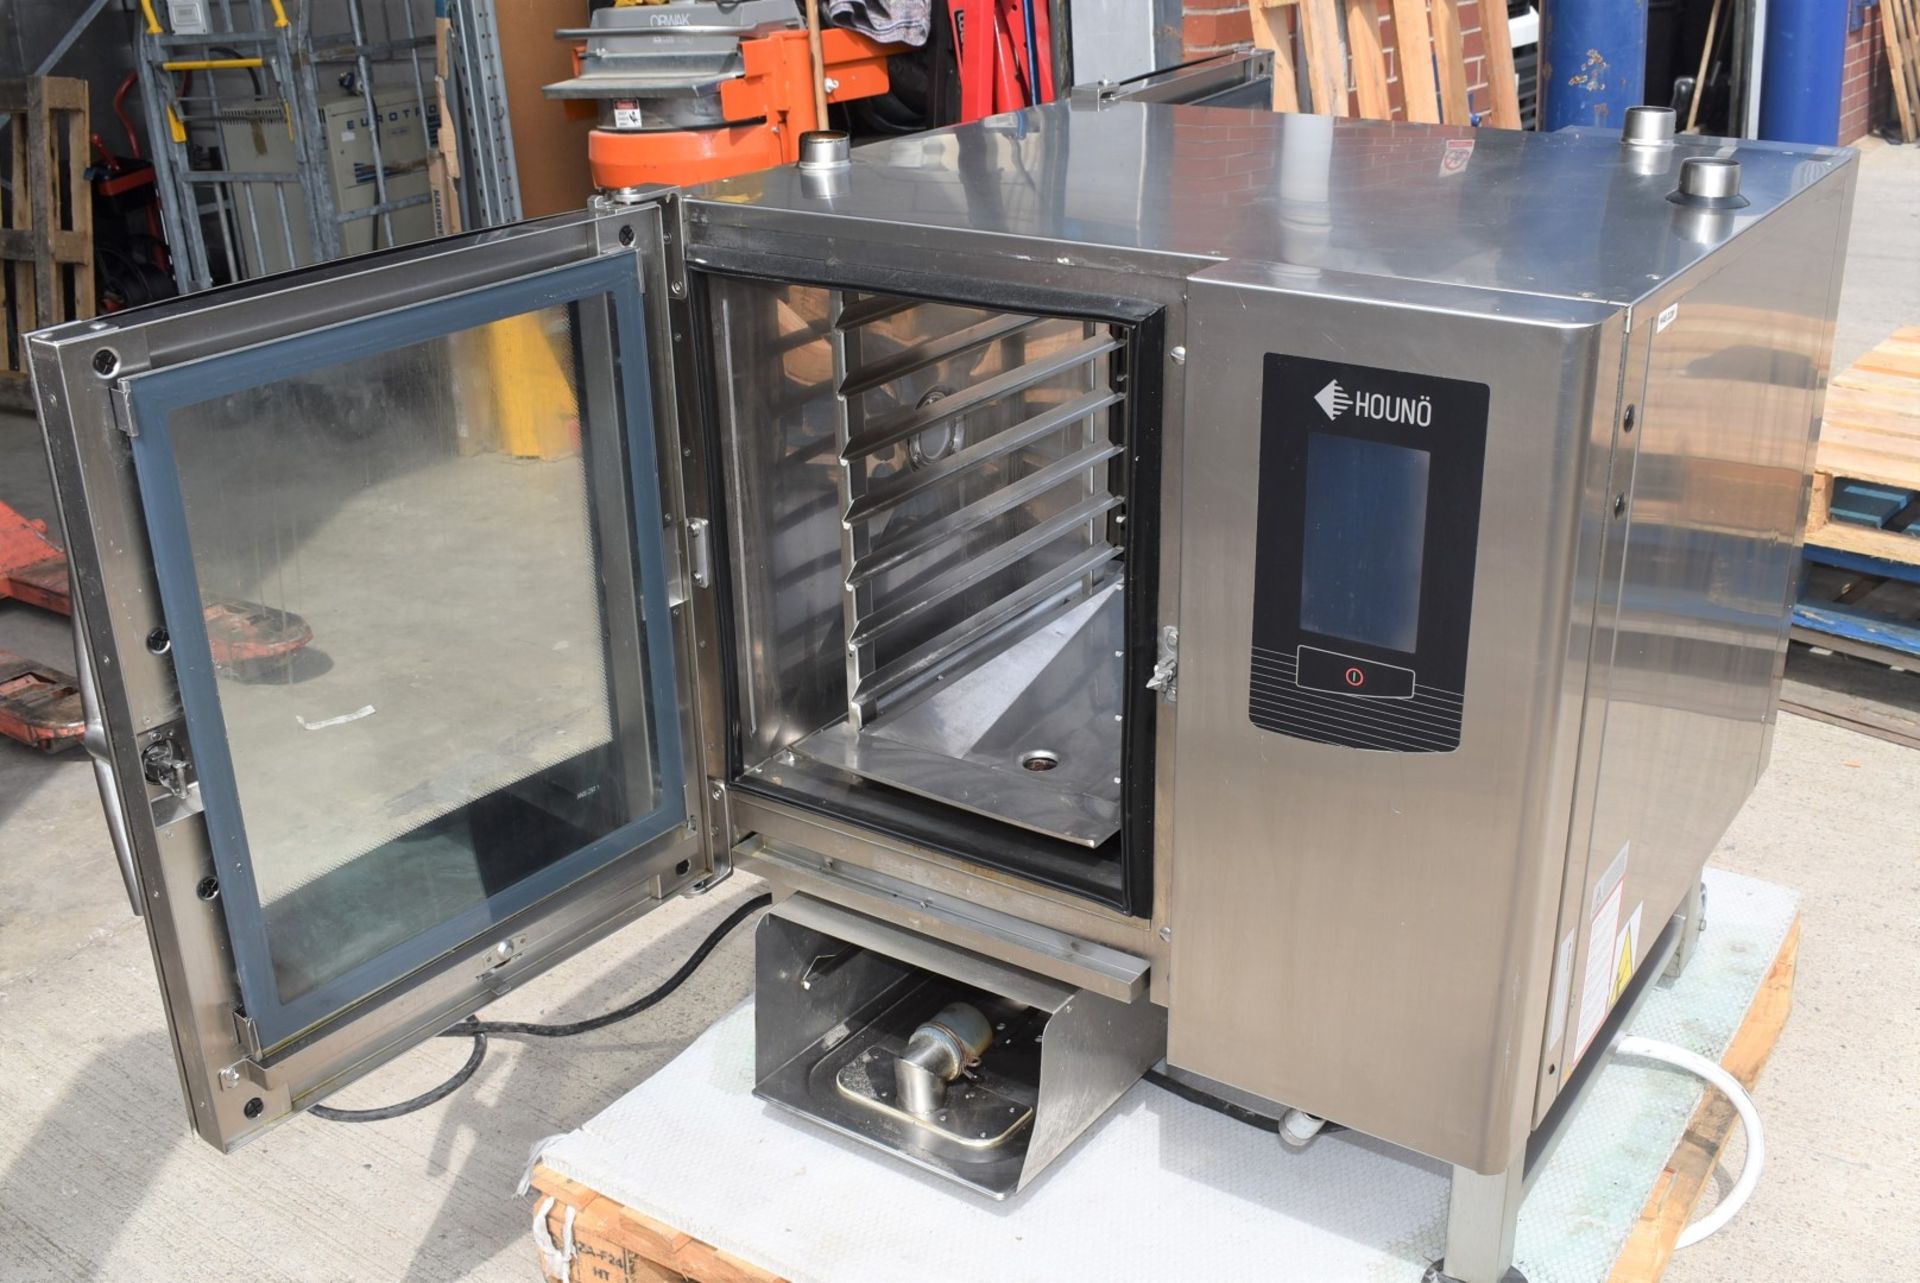 1 x Houno 6 Grid Electric Passthrough Door Combi Oven - 3 Phase With Pre-Set Cooking Options - Image 4 of 17